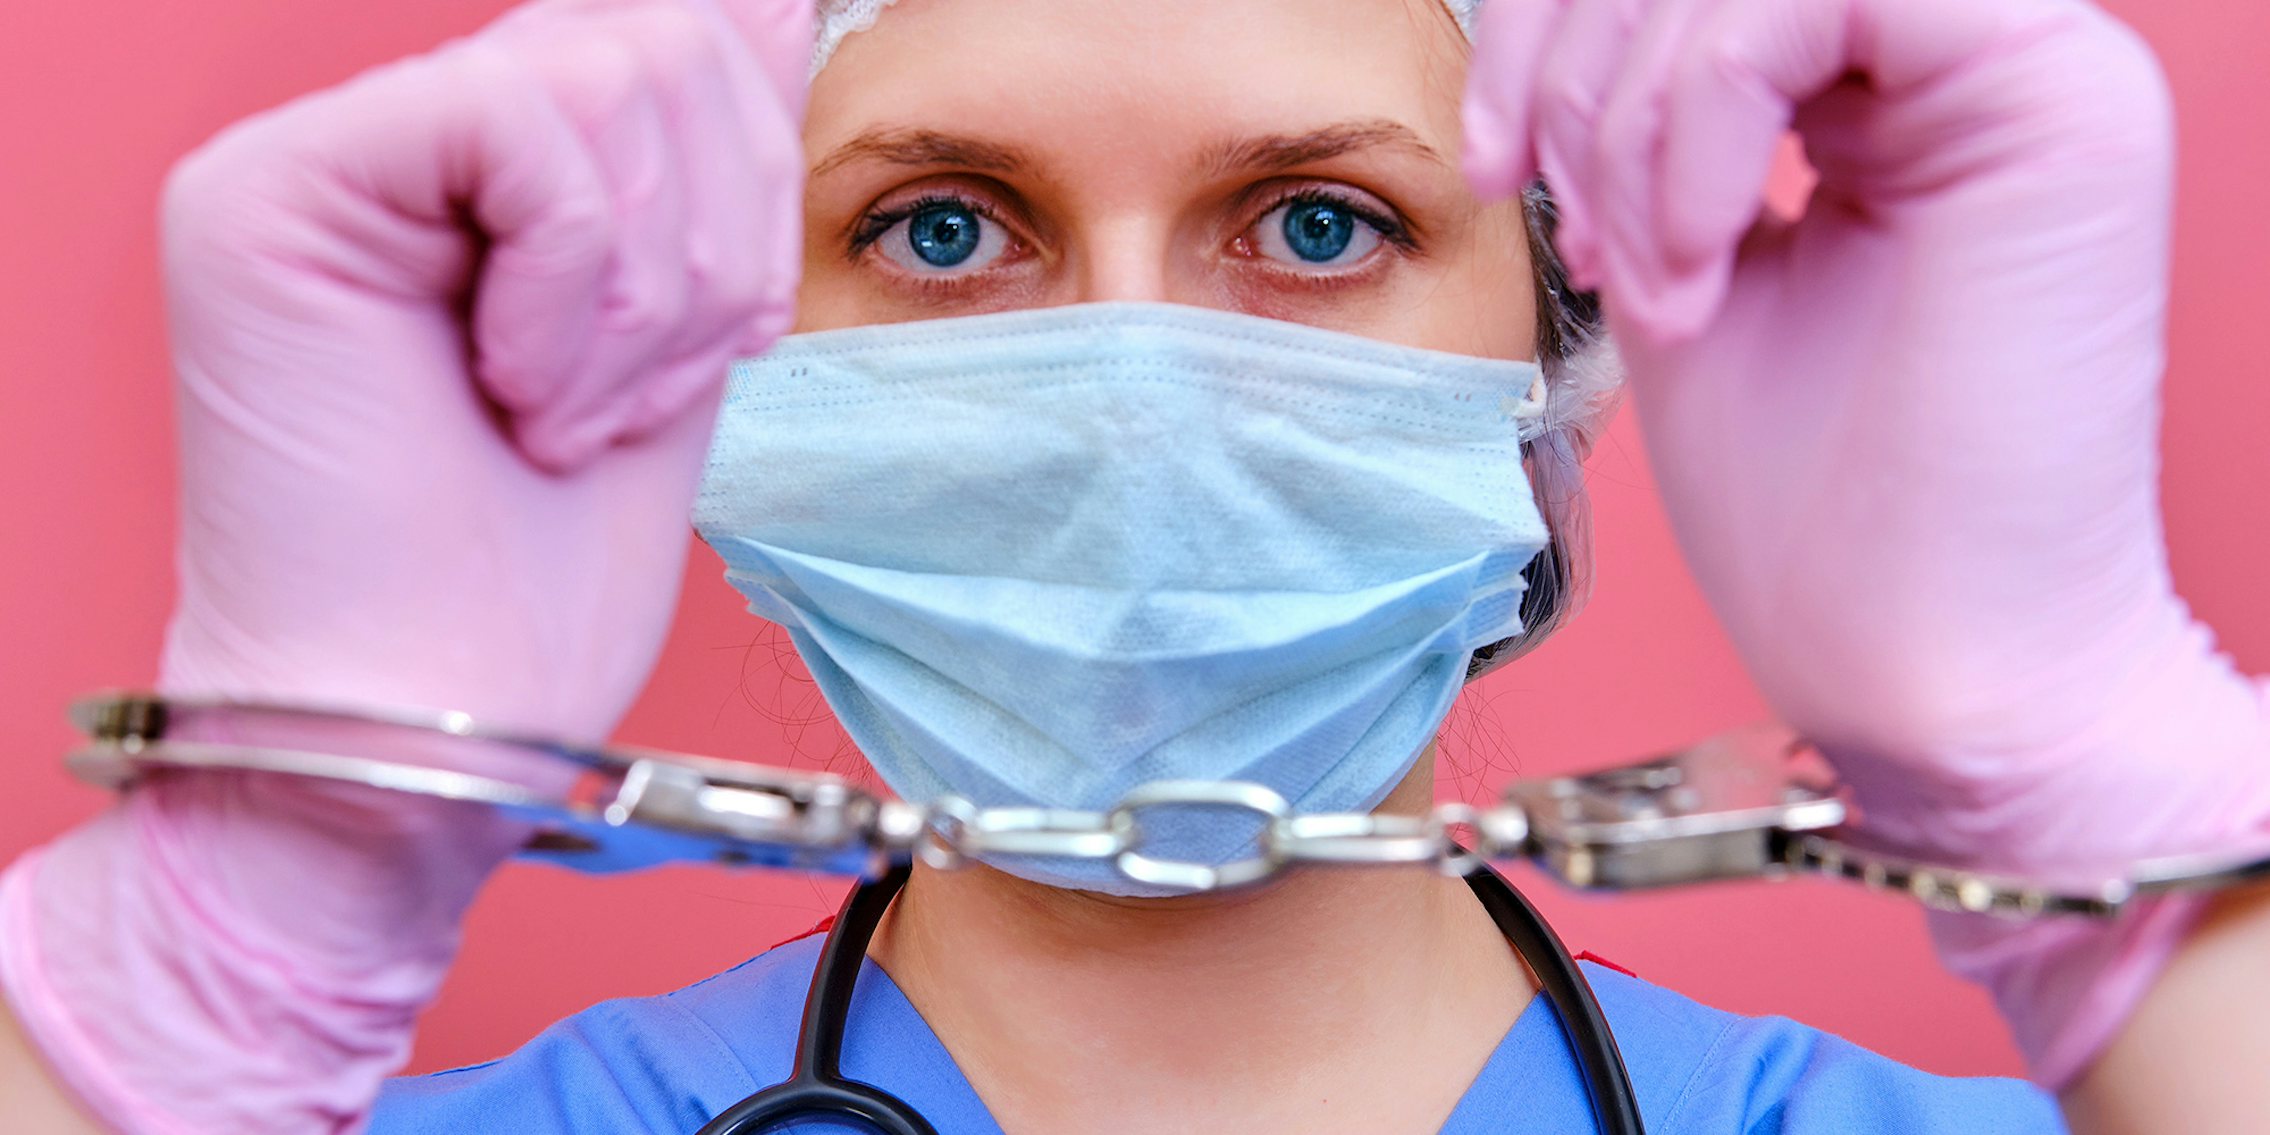 A nurse on a pink background shows hands in handcuffs, closeup.